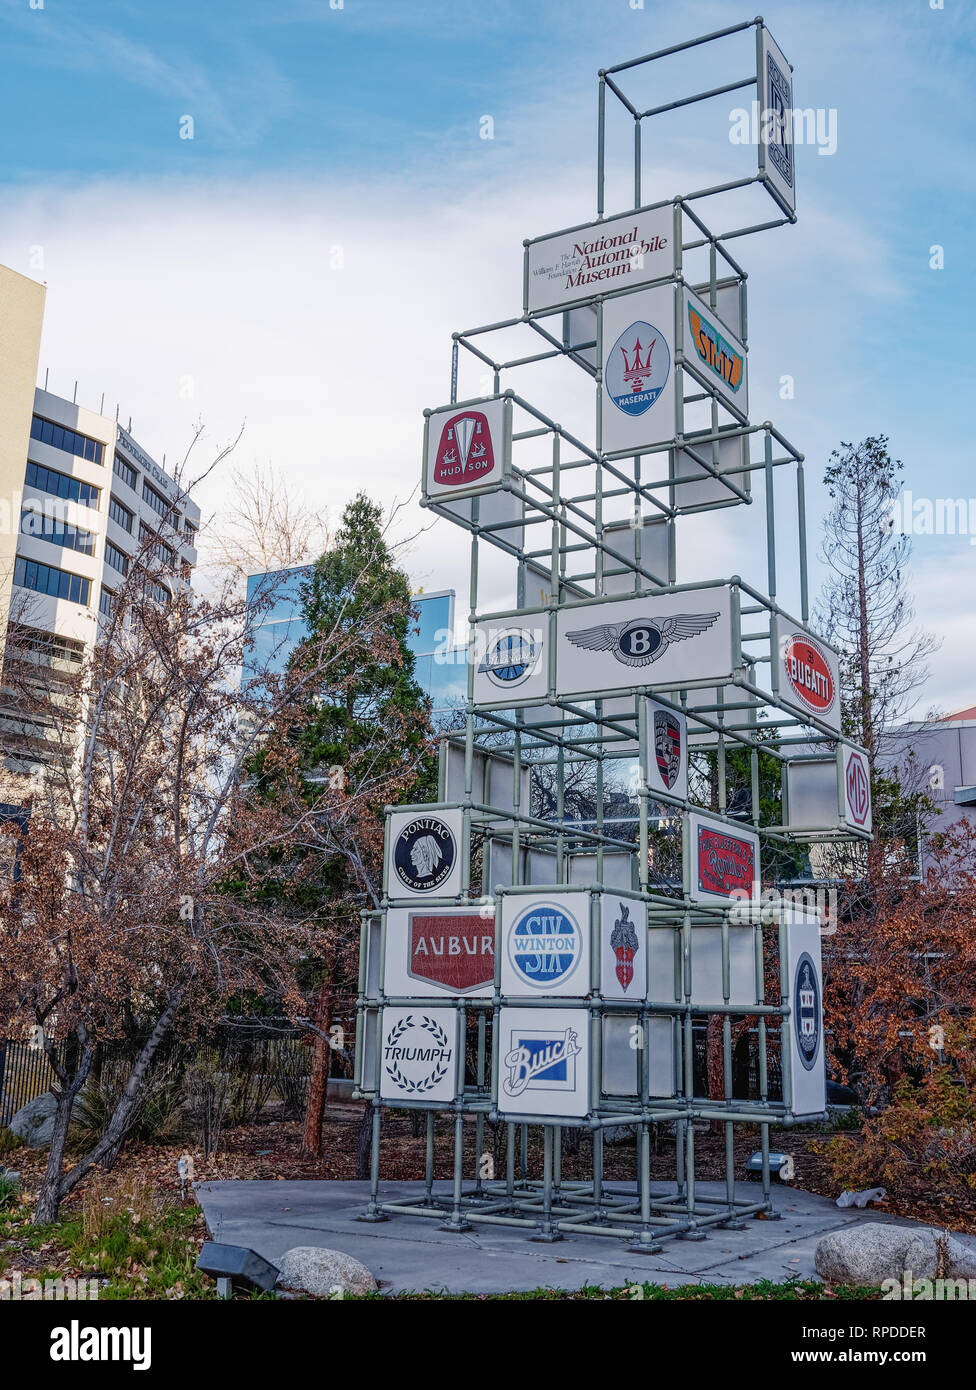 Reno, Nevada - November 25, 2016: This sign outside the William F. Harrah Foundation National Automobile Museum shows the logos of many auto manufactu Stock Photo